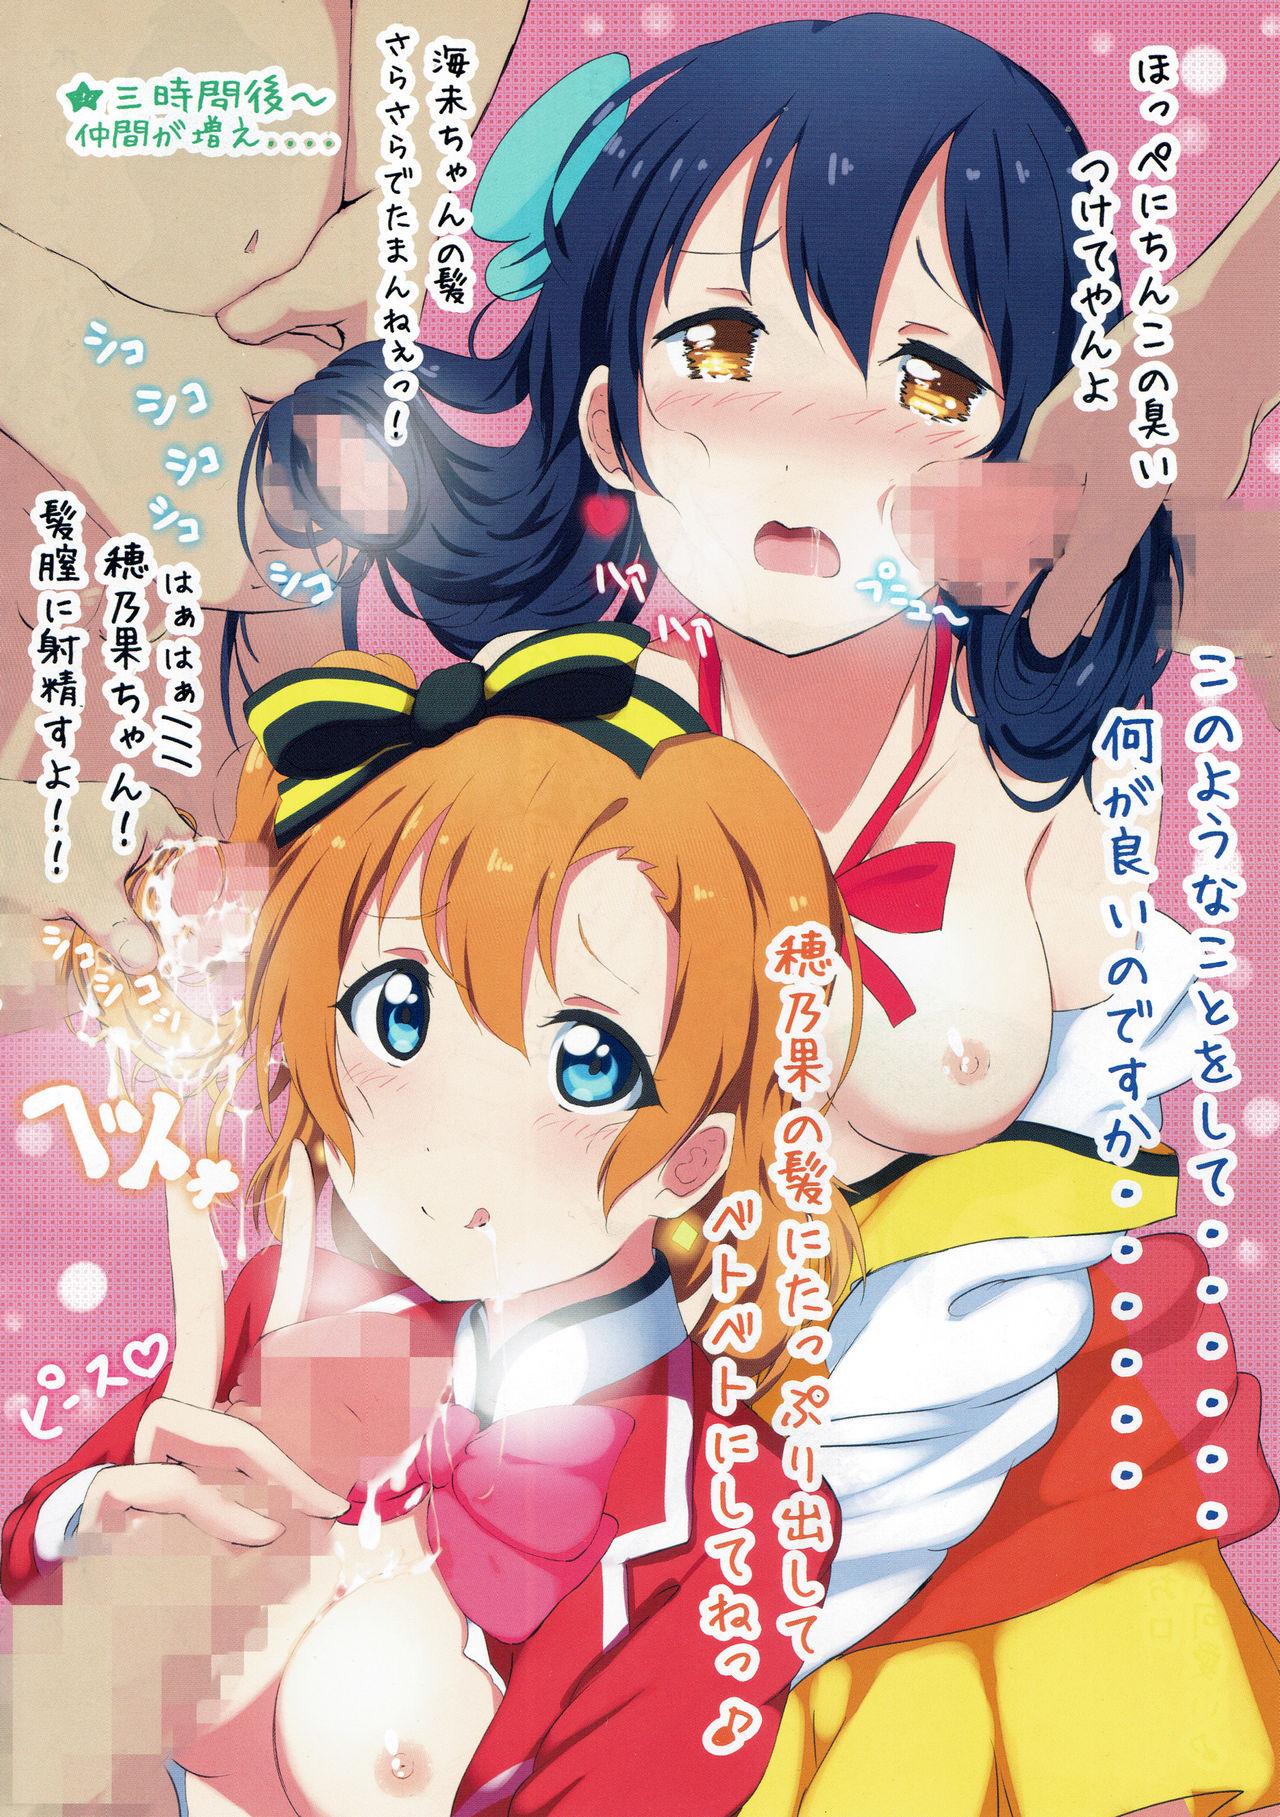 Wild HONOUMIKAN - Love live Lady - Page 3